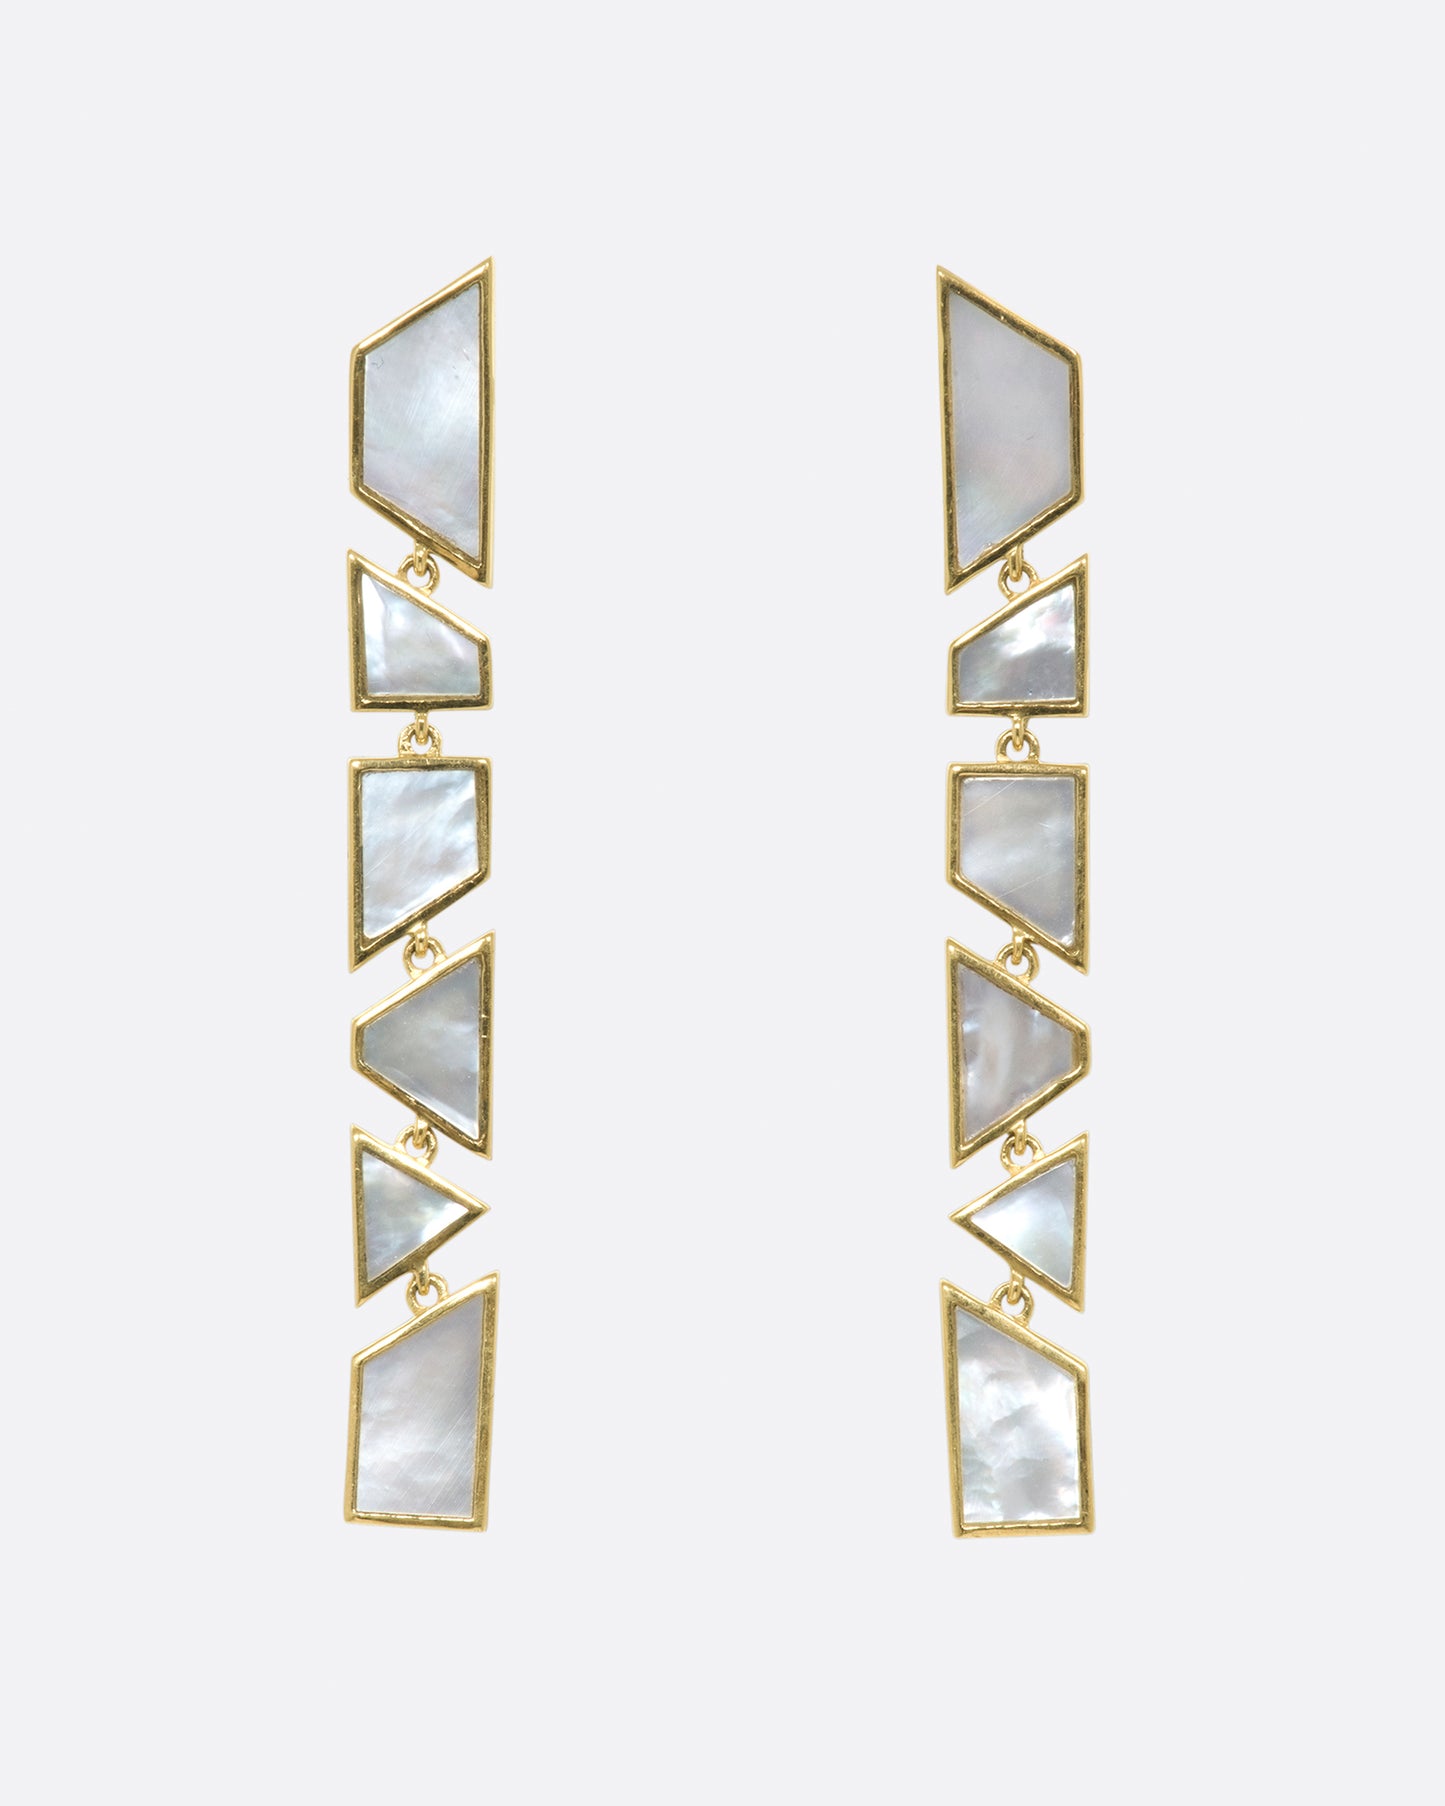 These earrings make a statement while still being lightweight and neutral.